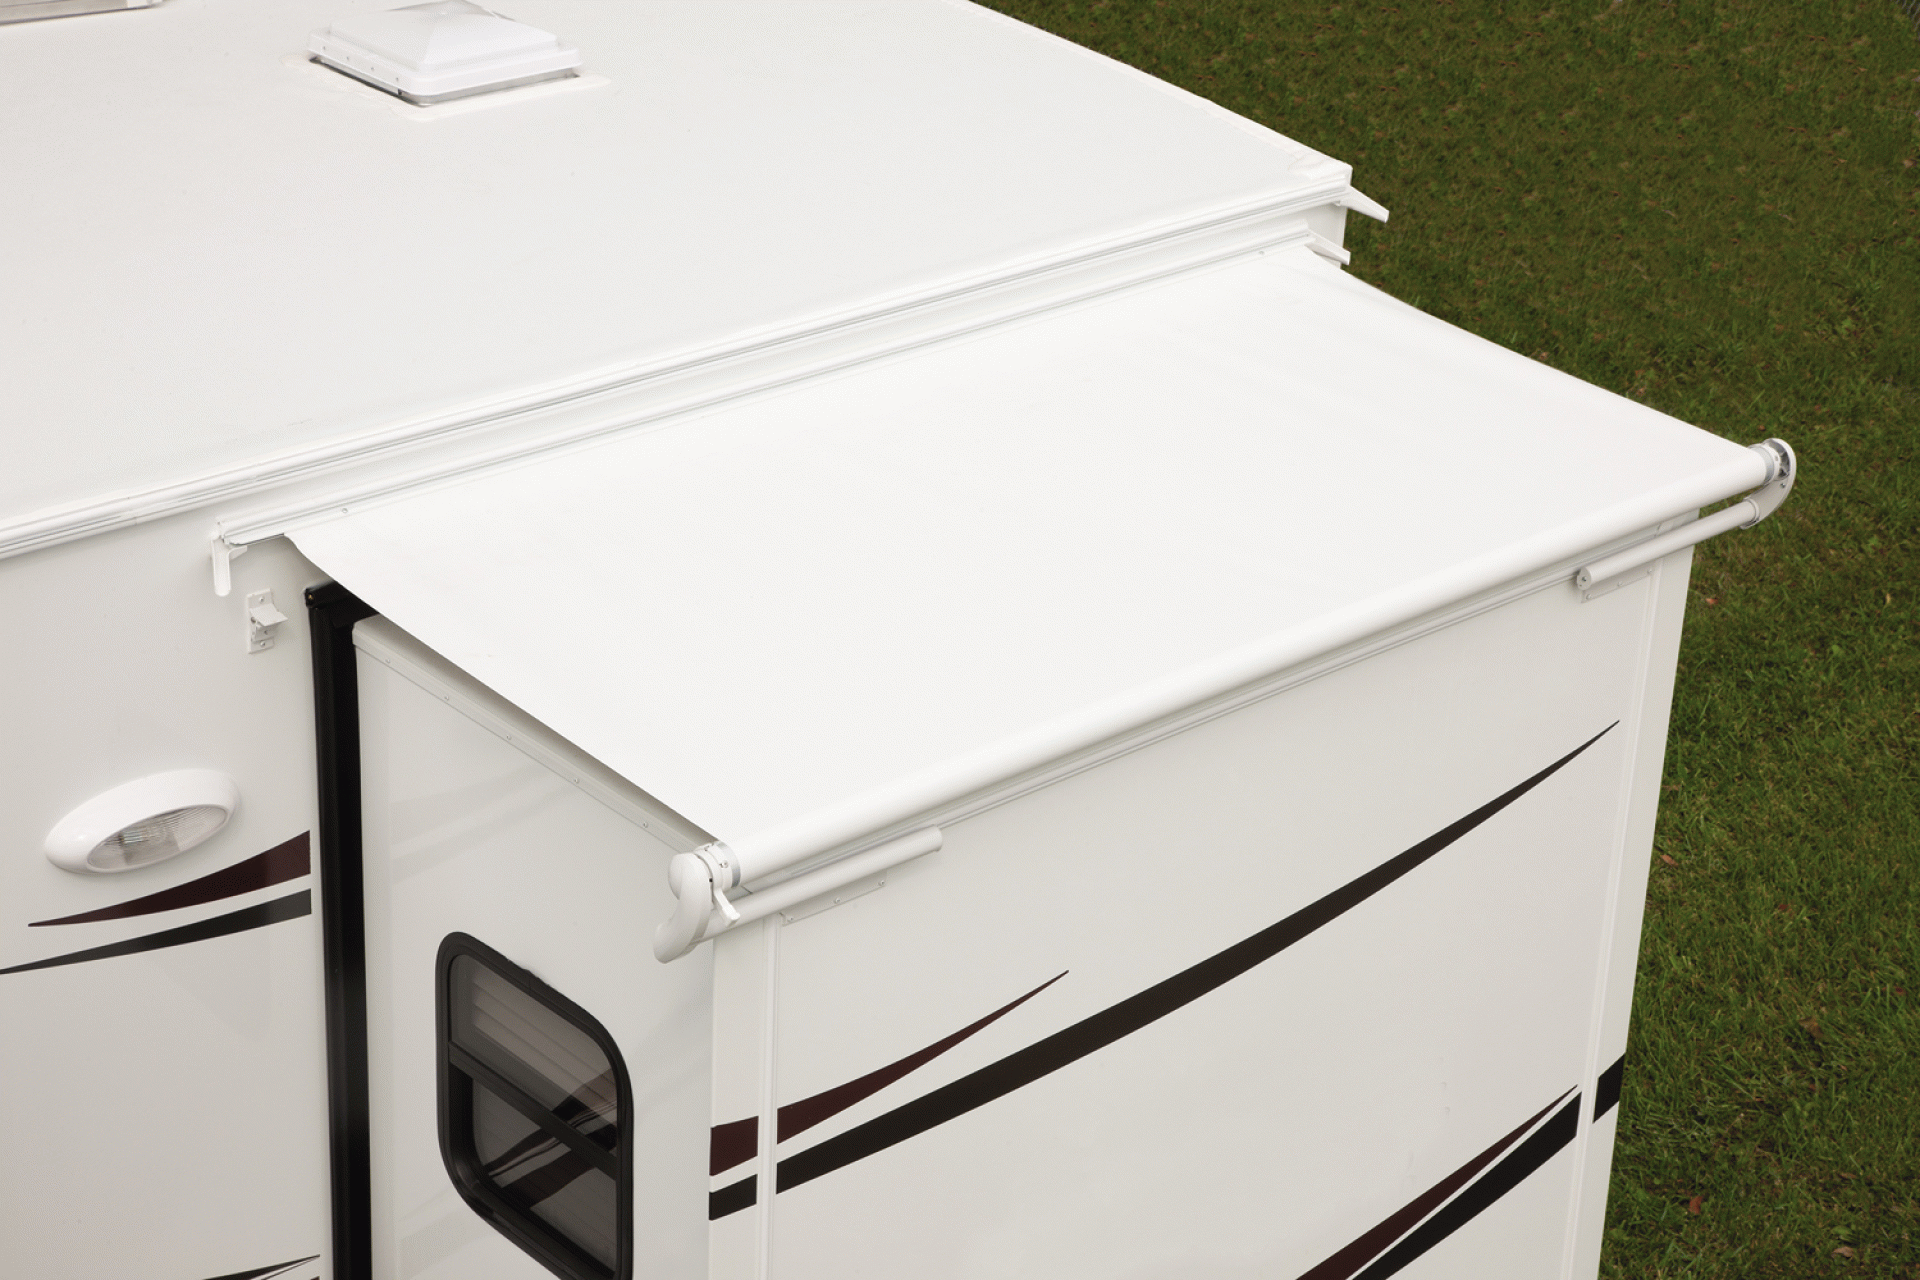 DOMETIC | 98001CQ.192B | DELUXE SLIDE TOPPER 192" FITS ROOM WIDTH 182"-187 3/4" WHITE VINYL WHITE WEATHERSHIELD